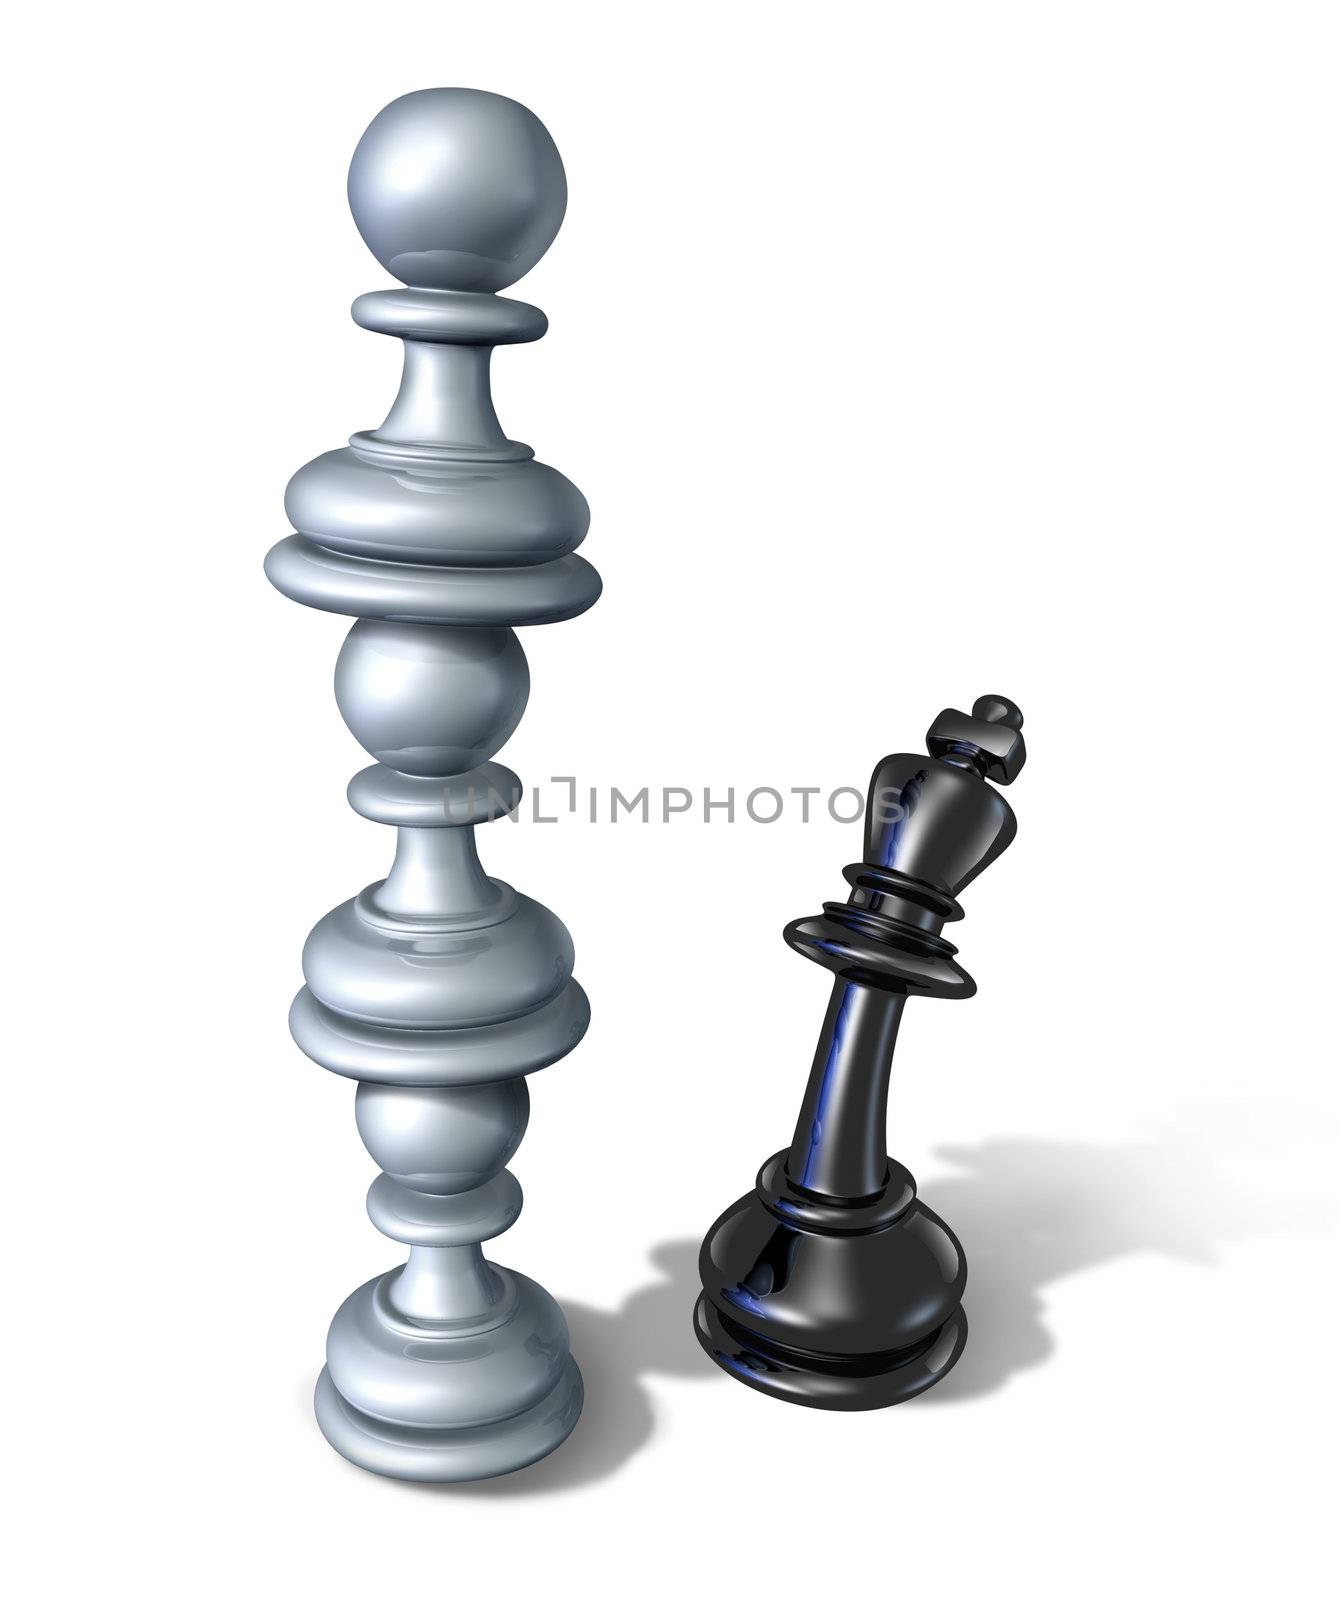 Business team symbol and teaming up to defeat a powerful opponent with three chess pawns stacked one on top of each other forming a strong partnership that towers over the fearful king as a winning financial strategy.